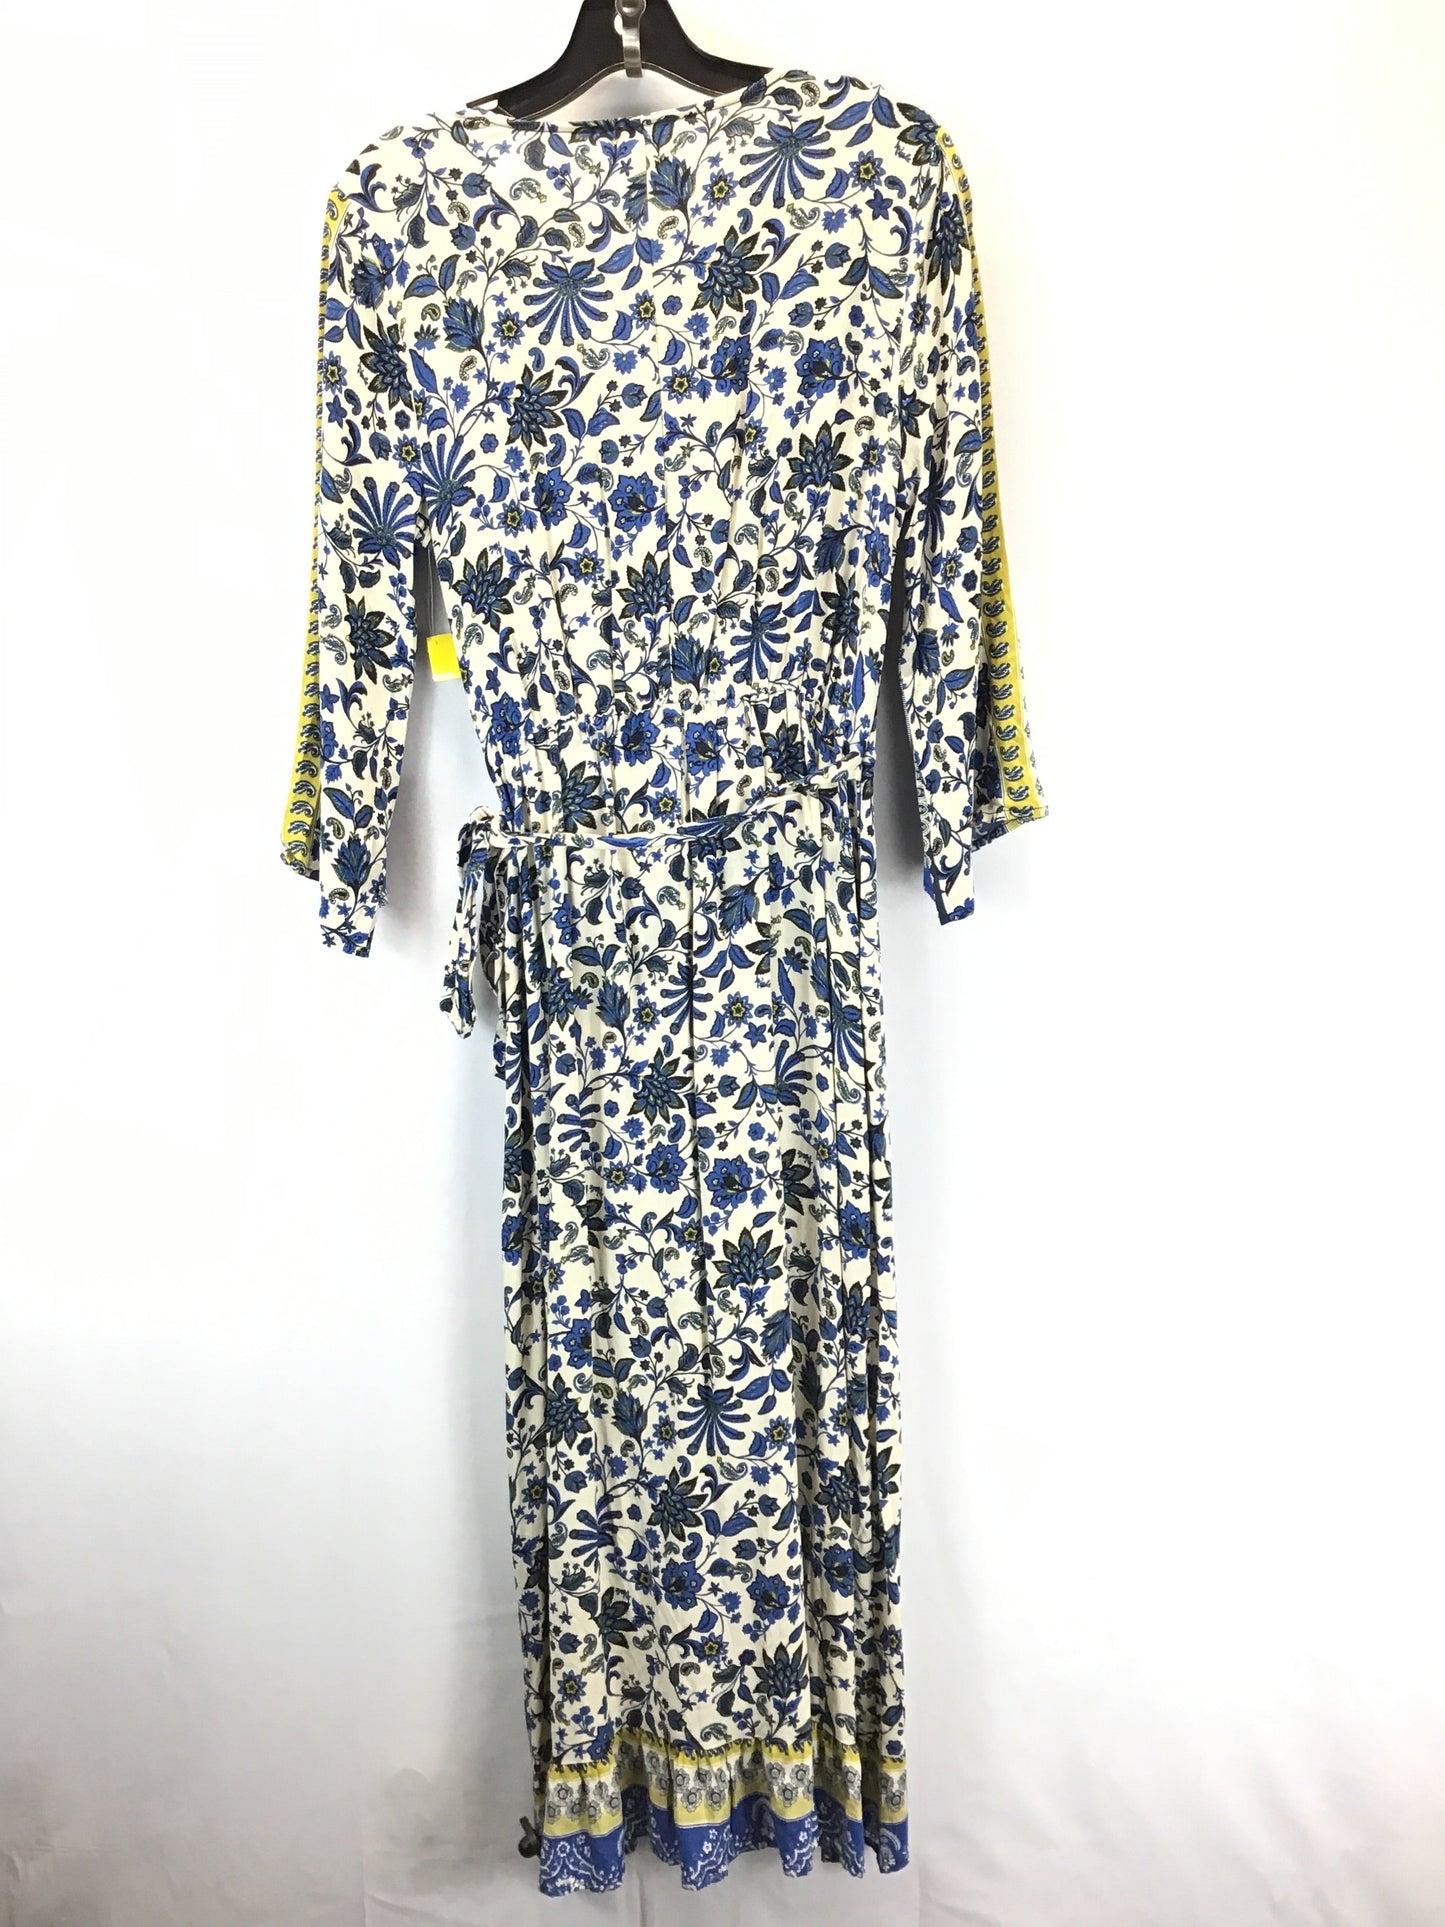 Dress Casual Maxi By Cato  Size: M